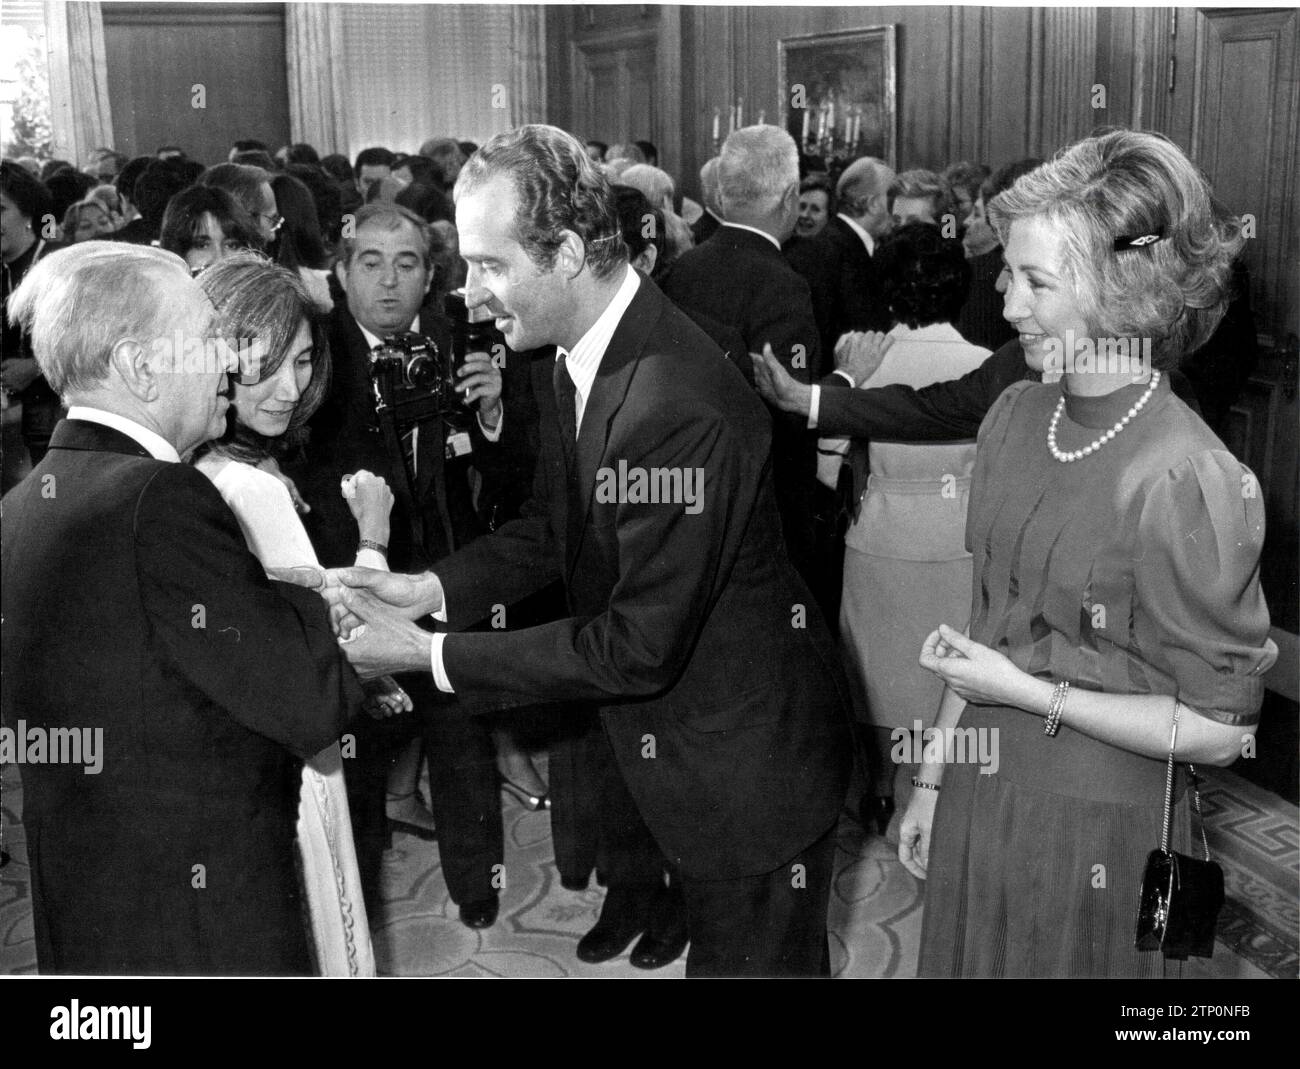 04/22/1980. H.H. Mm. The Kings Juan Carlos and Doña Sofía present the Cervantes Prize to the Writers Jorge Luis Borges and Gerardo Diego in the auditorium of the University of Alcalá de Henares. In the Image, the Kings Affectionately Greet Jorge Luis Borges. Credit: Album / Archivo ABC / Manuel Sanz Bermejo Stock Photo